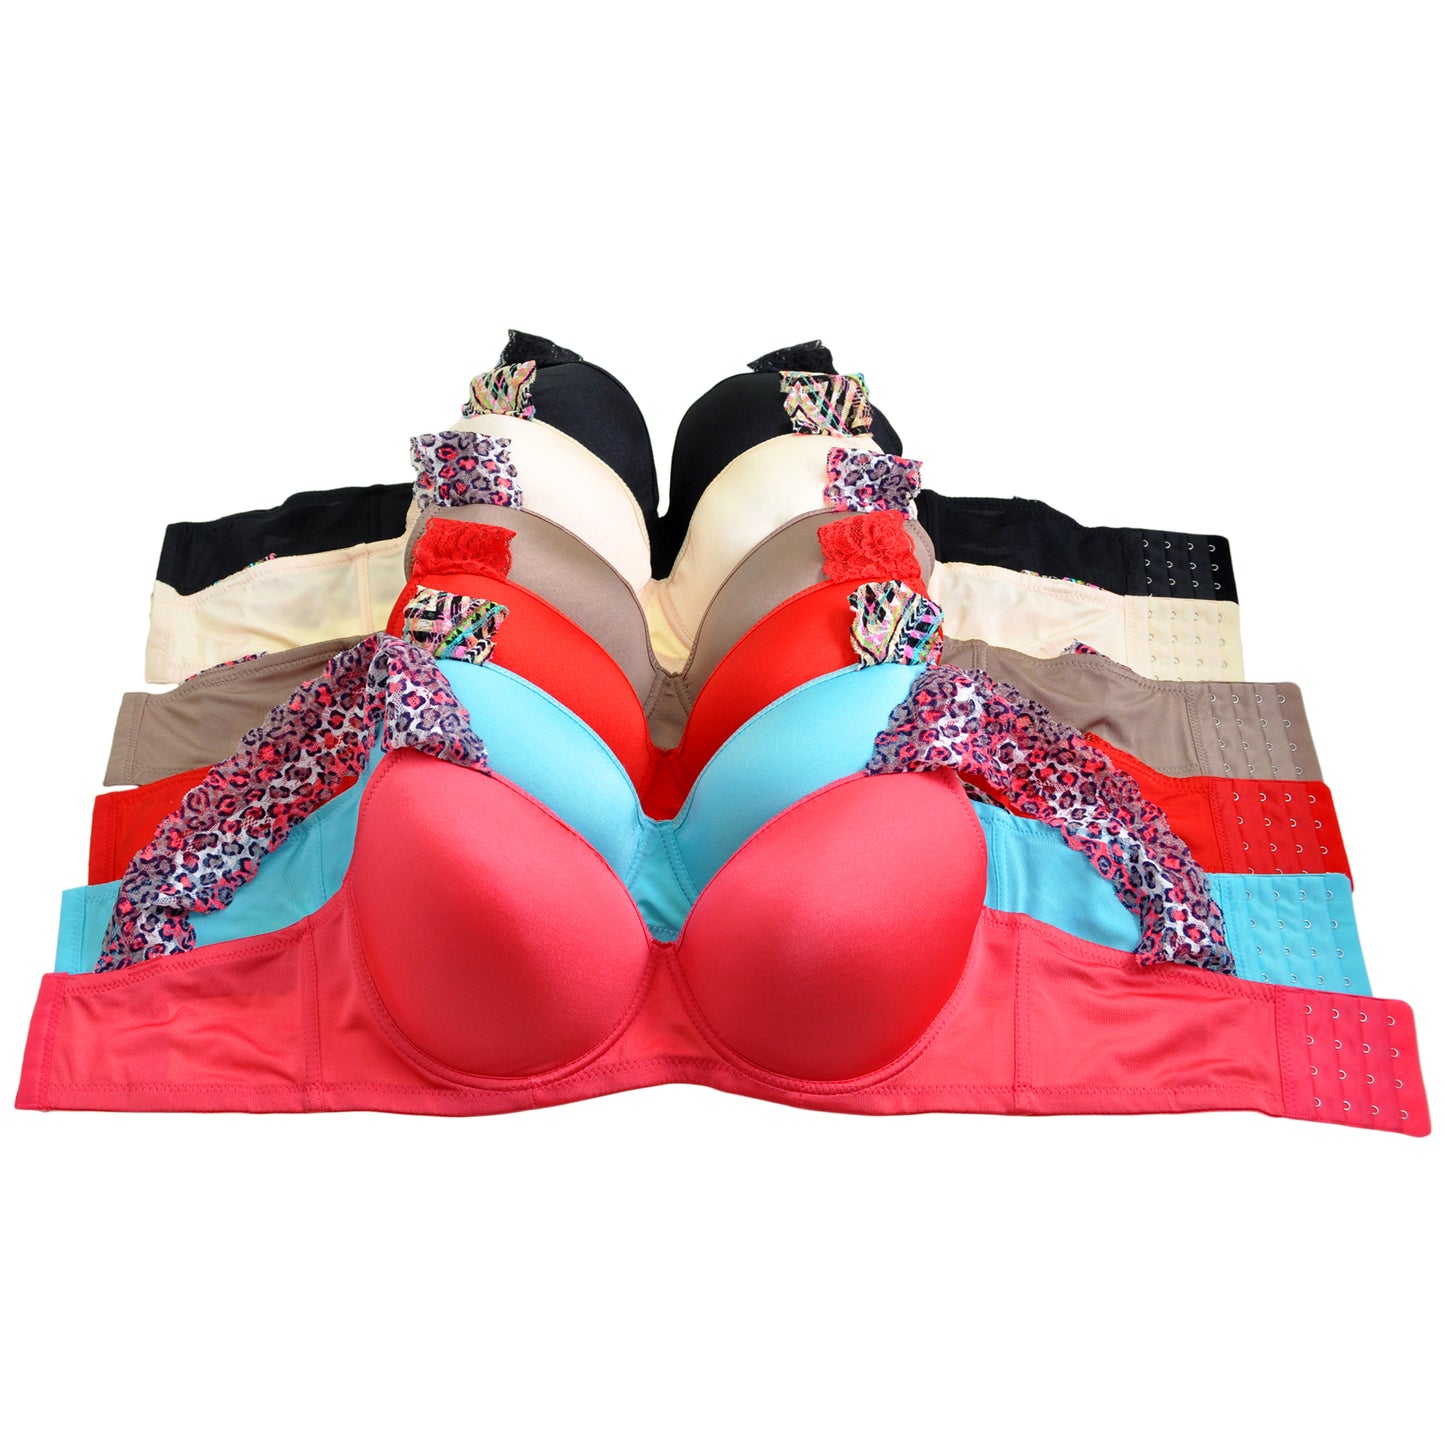 Matching Bra and Thong Set with Lace Accent Detail (6-Pack)